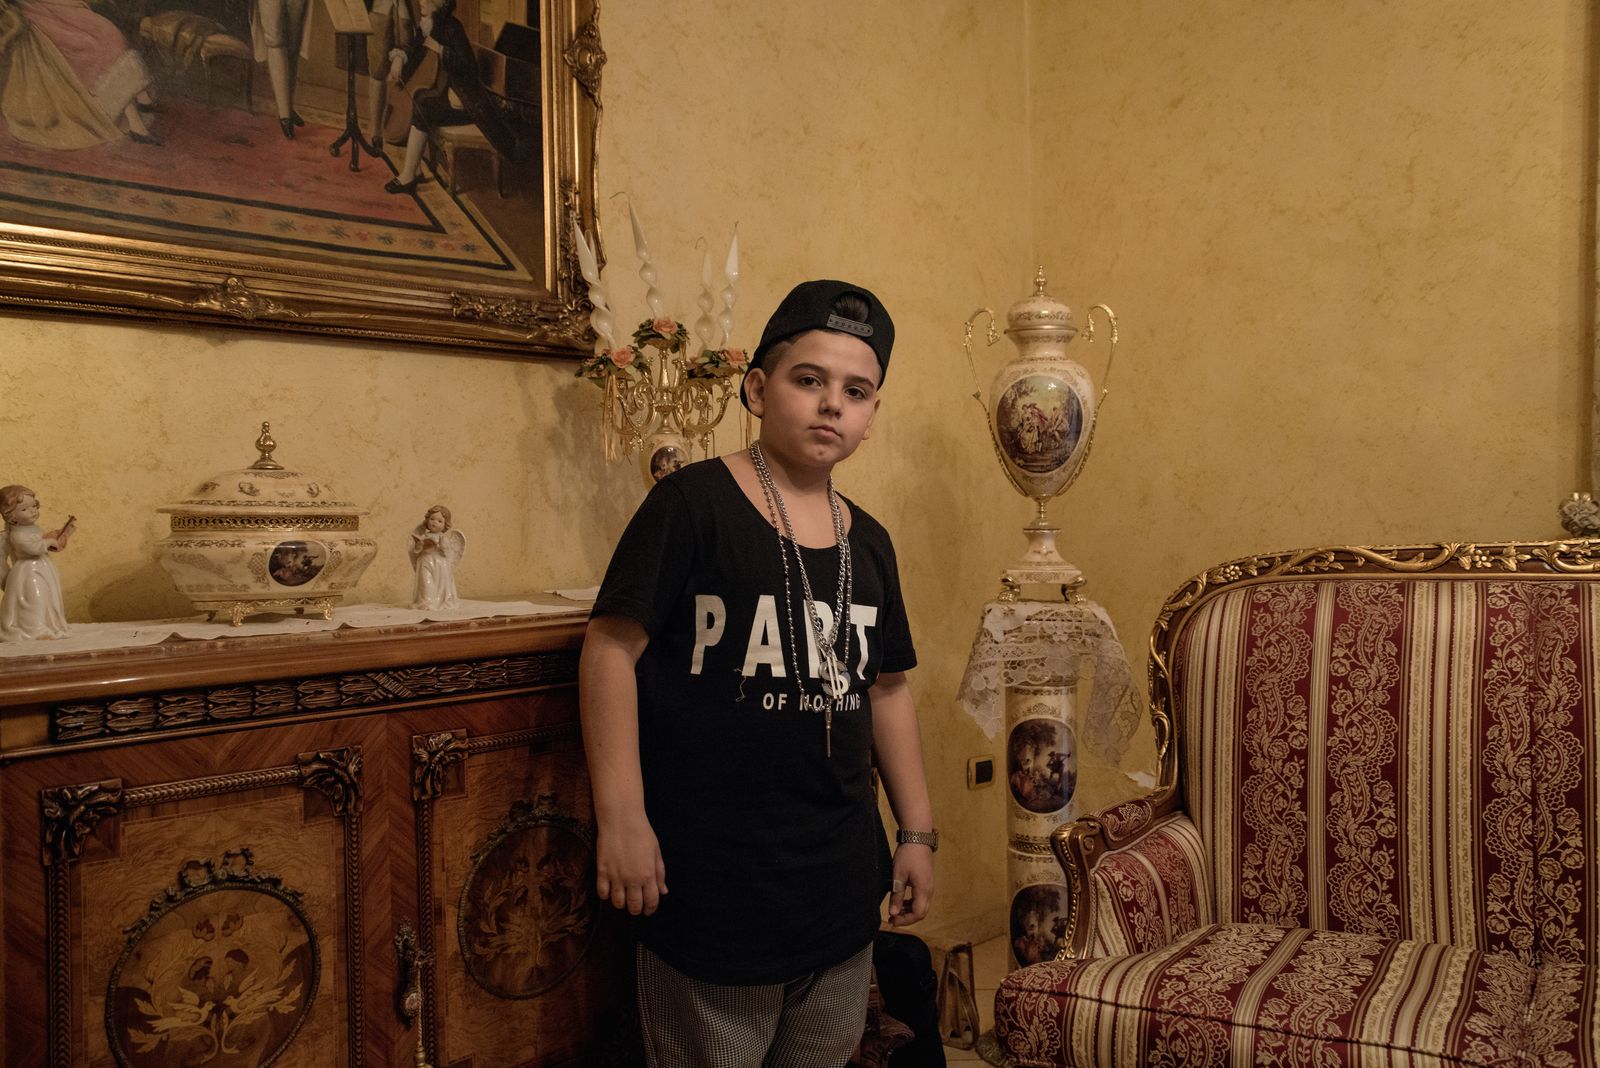 © Camillo Pasquarelli - Luciano Ferrara, 8 years old, in the living room of his house in Frignano.